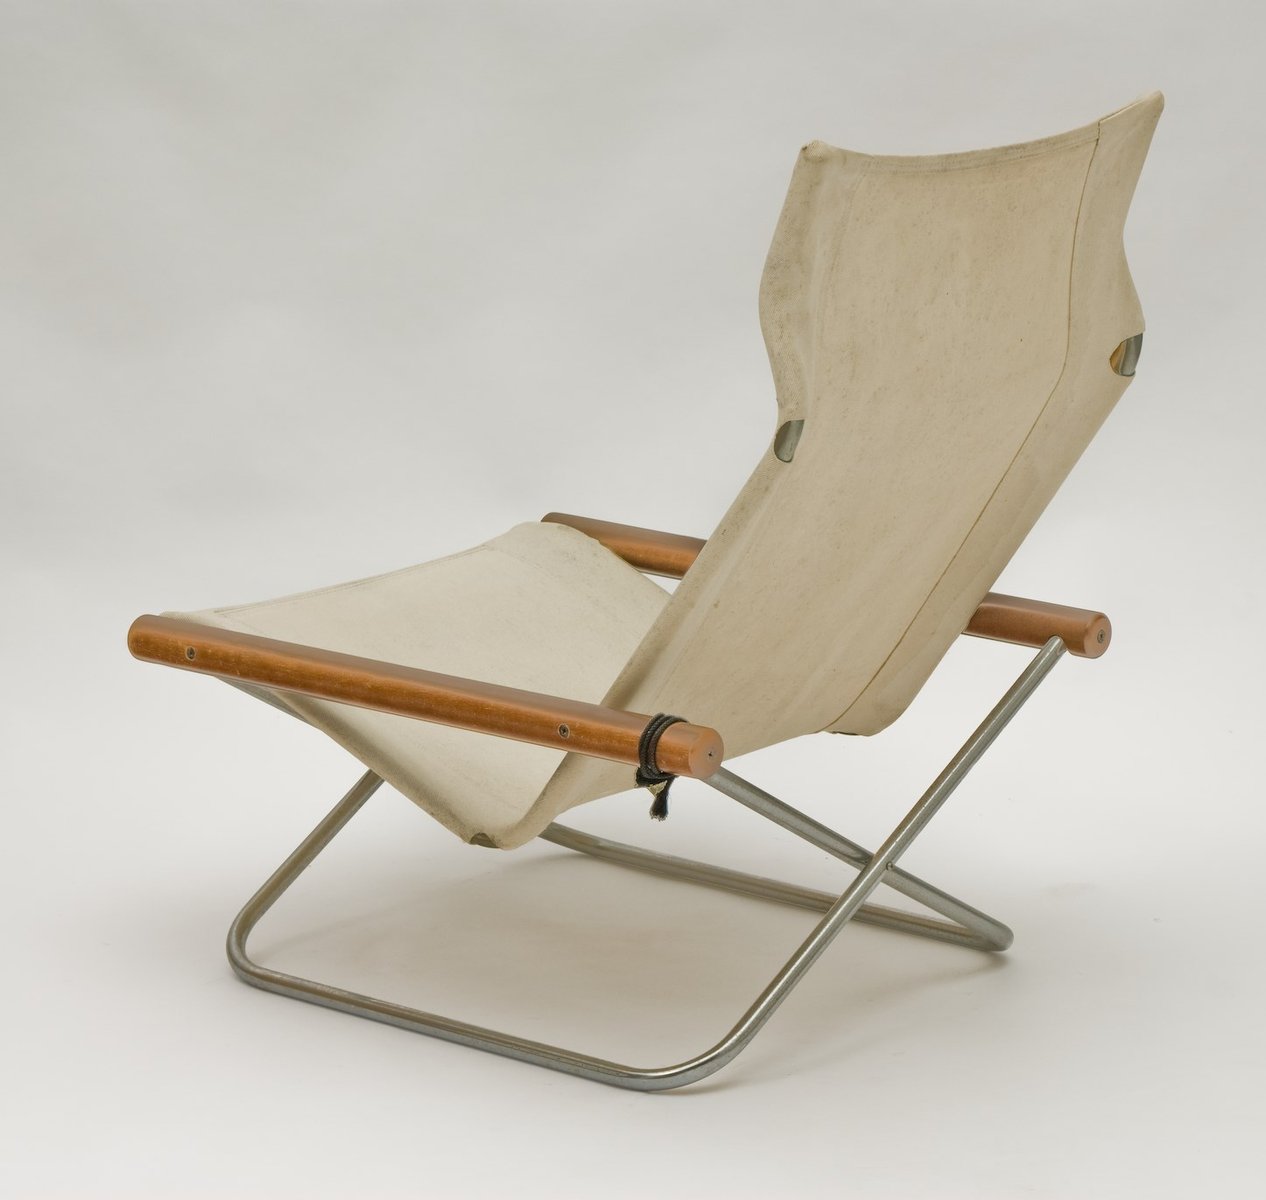 Japanese Nychair Folding Chair by Takeshi Nii for sale at Pamono